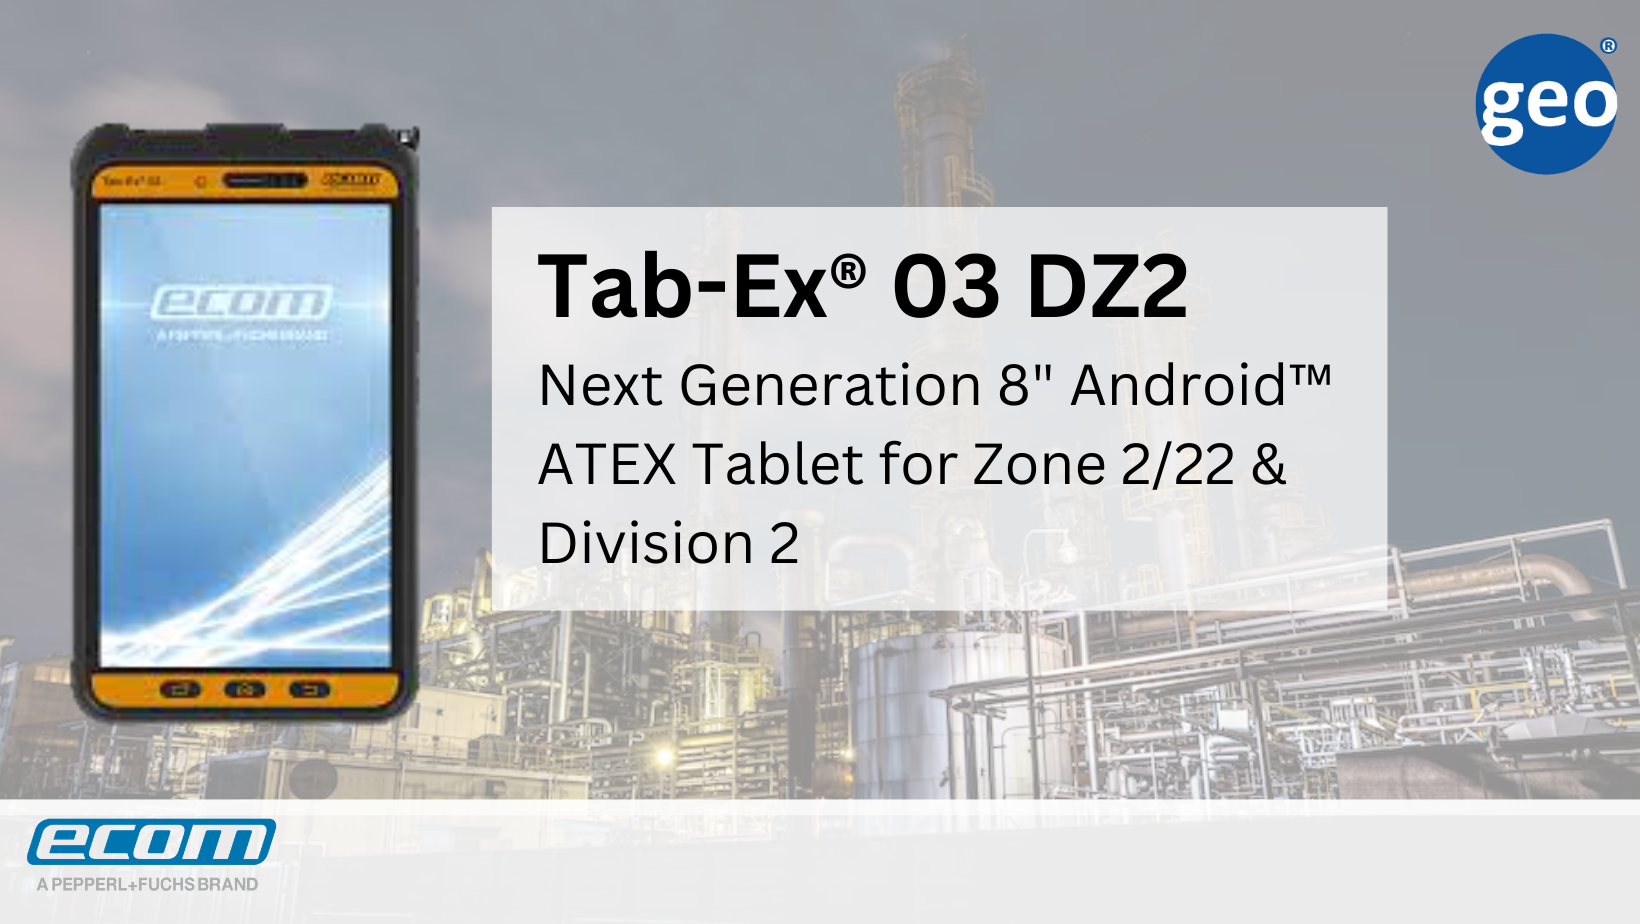 eCom: The Tab-Ex® 03 DZ2 comes in a slim and lightweight design with a new high-performance operating system that powers the tablet with industry-leading performance in hazardous areas.